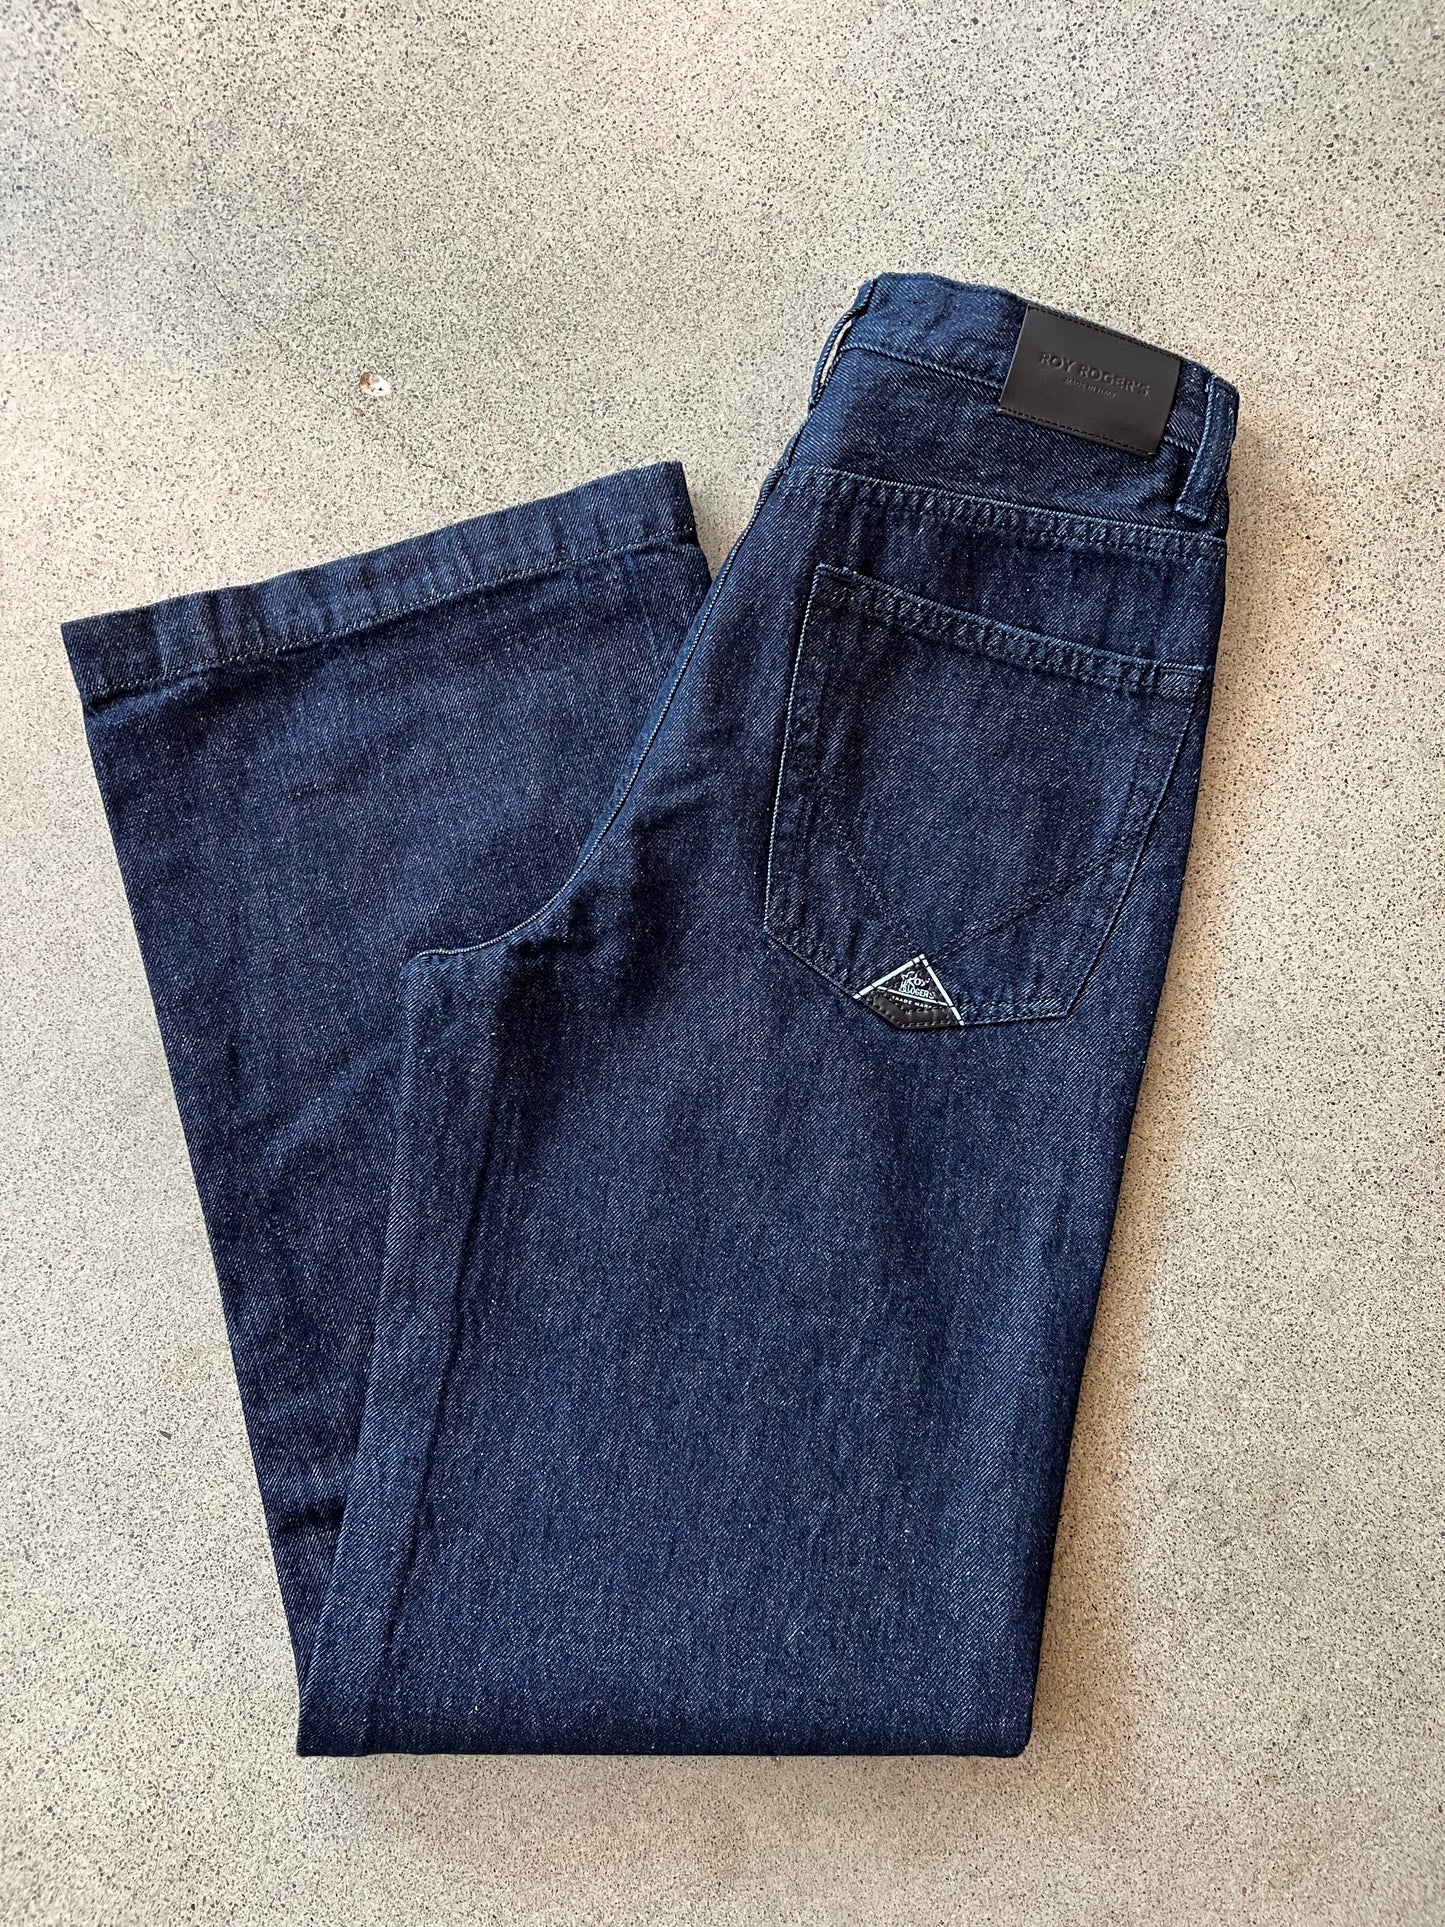 Roy Rogers Marta Re-Issue Jeans